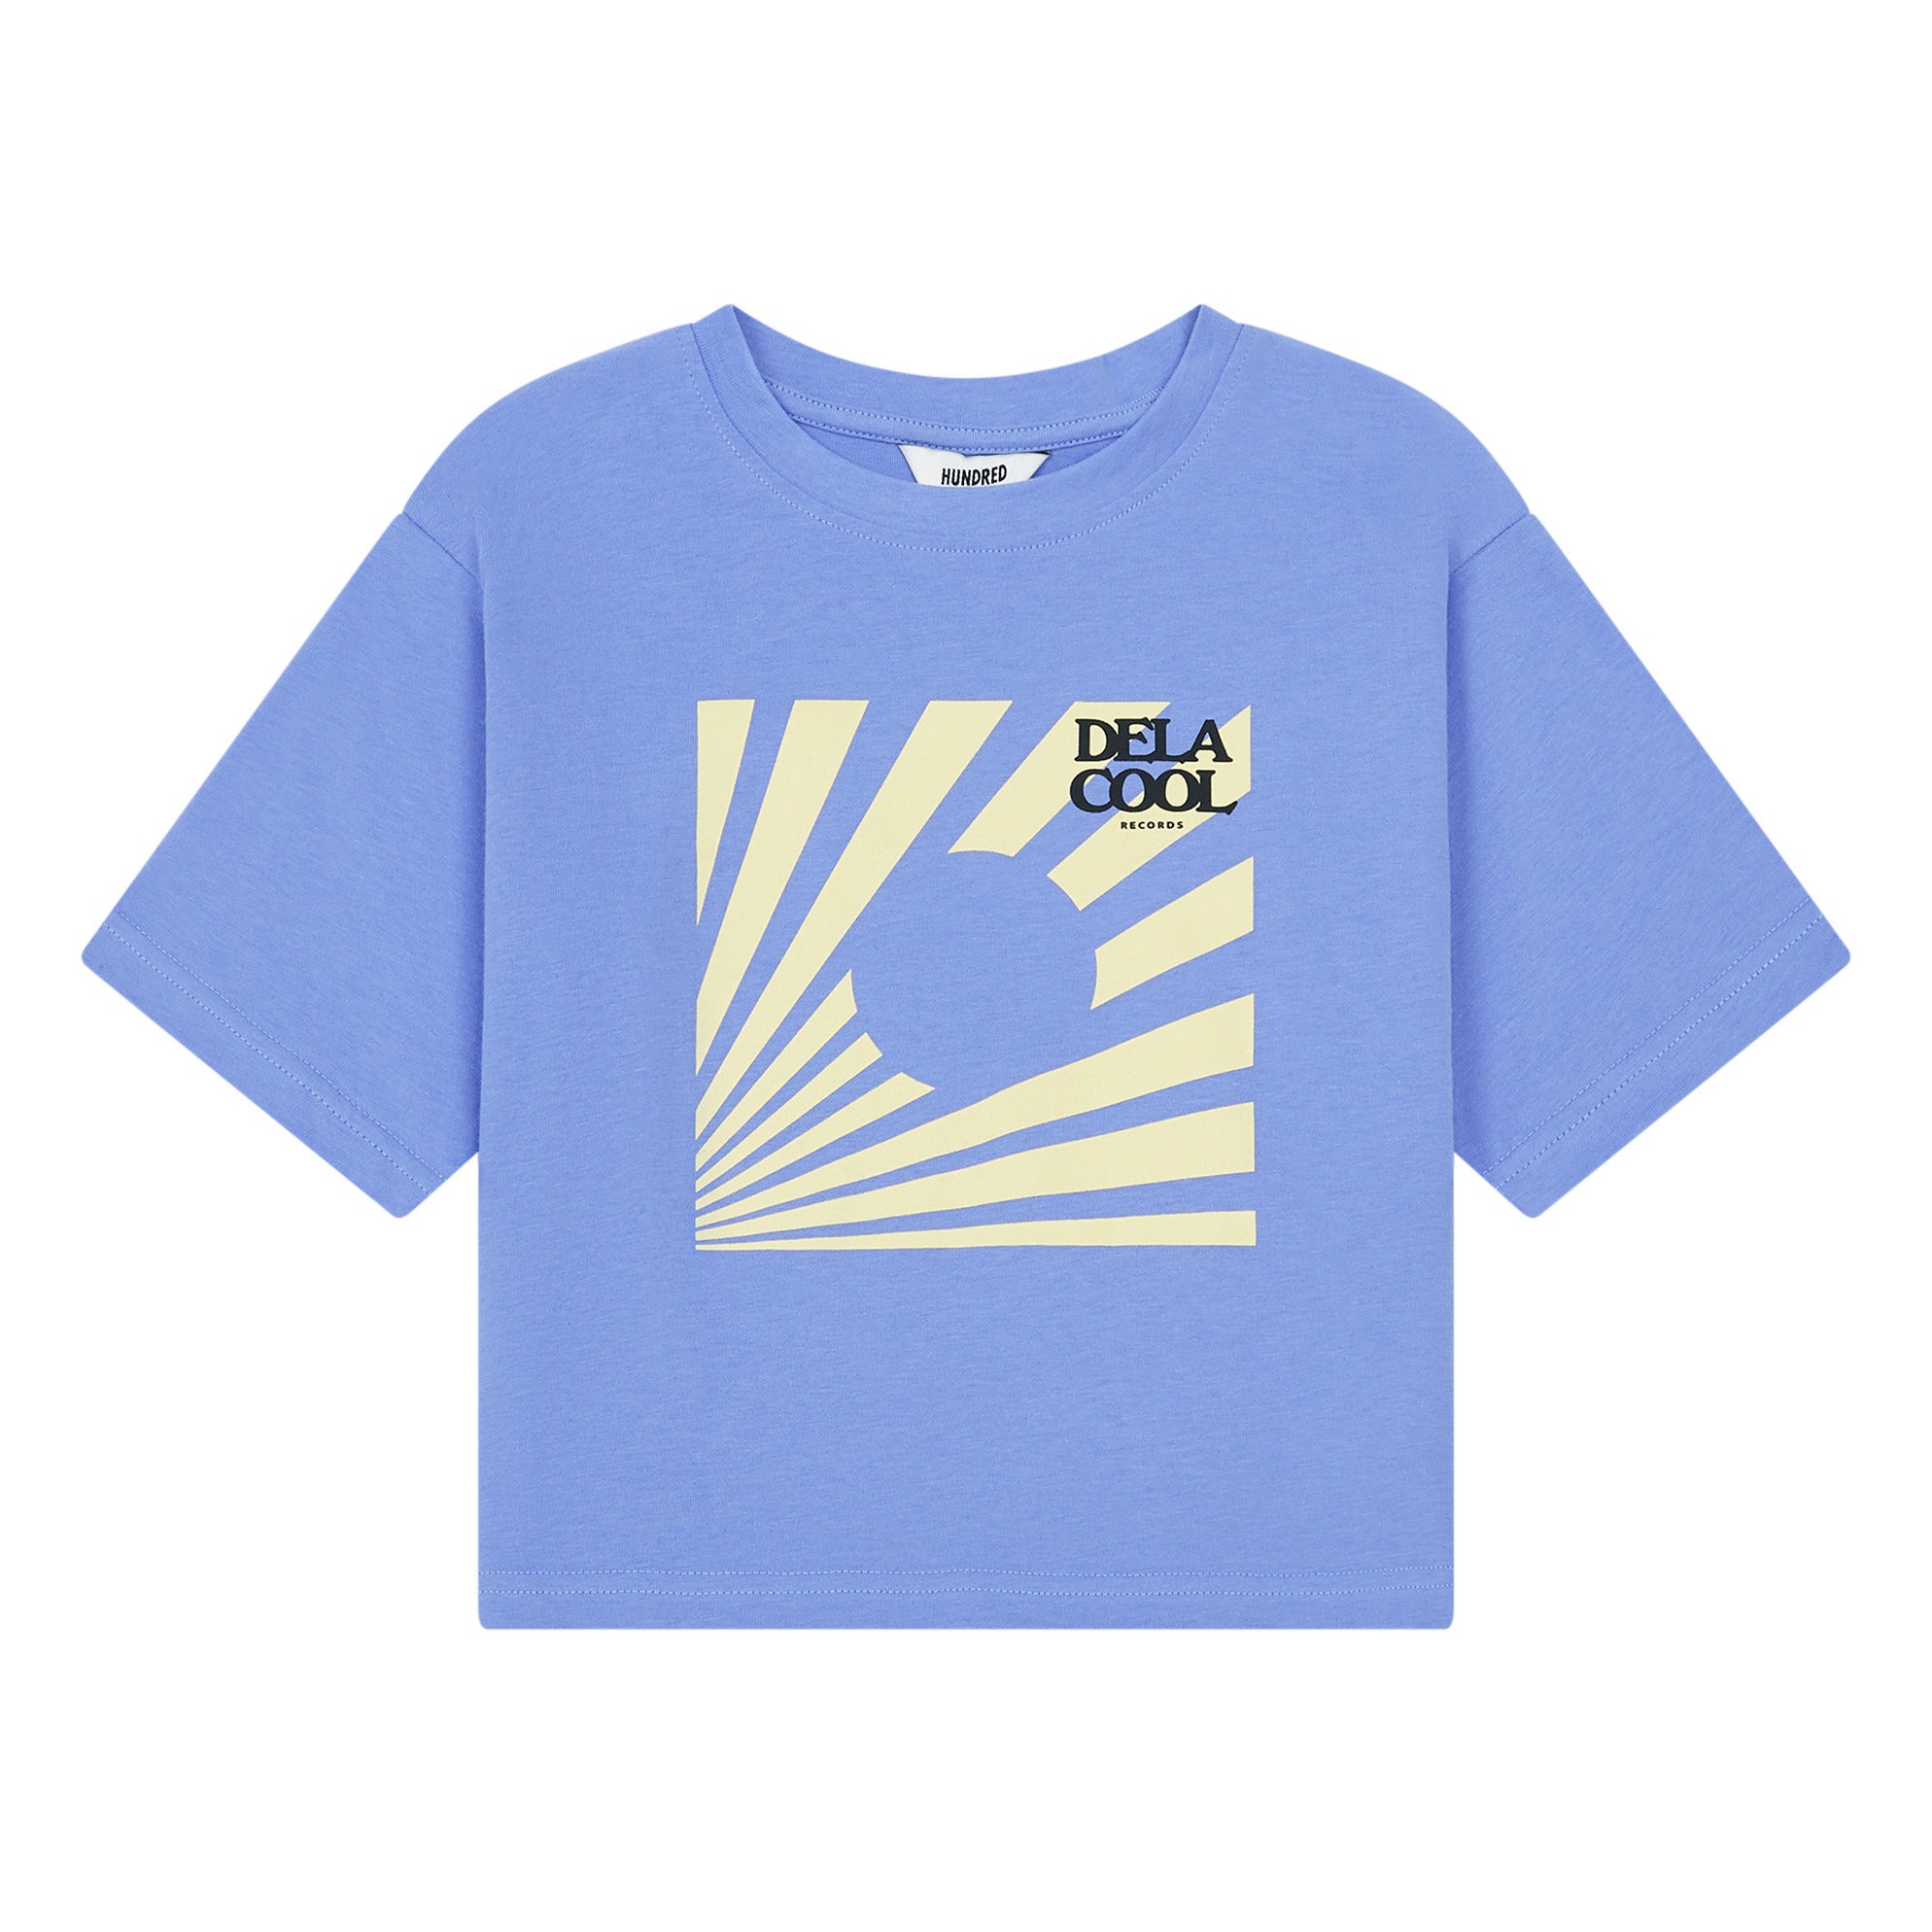 Hundred Pieces T-Shirt Oversized  Dela cool records blau